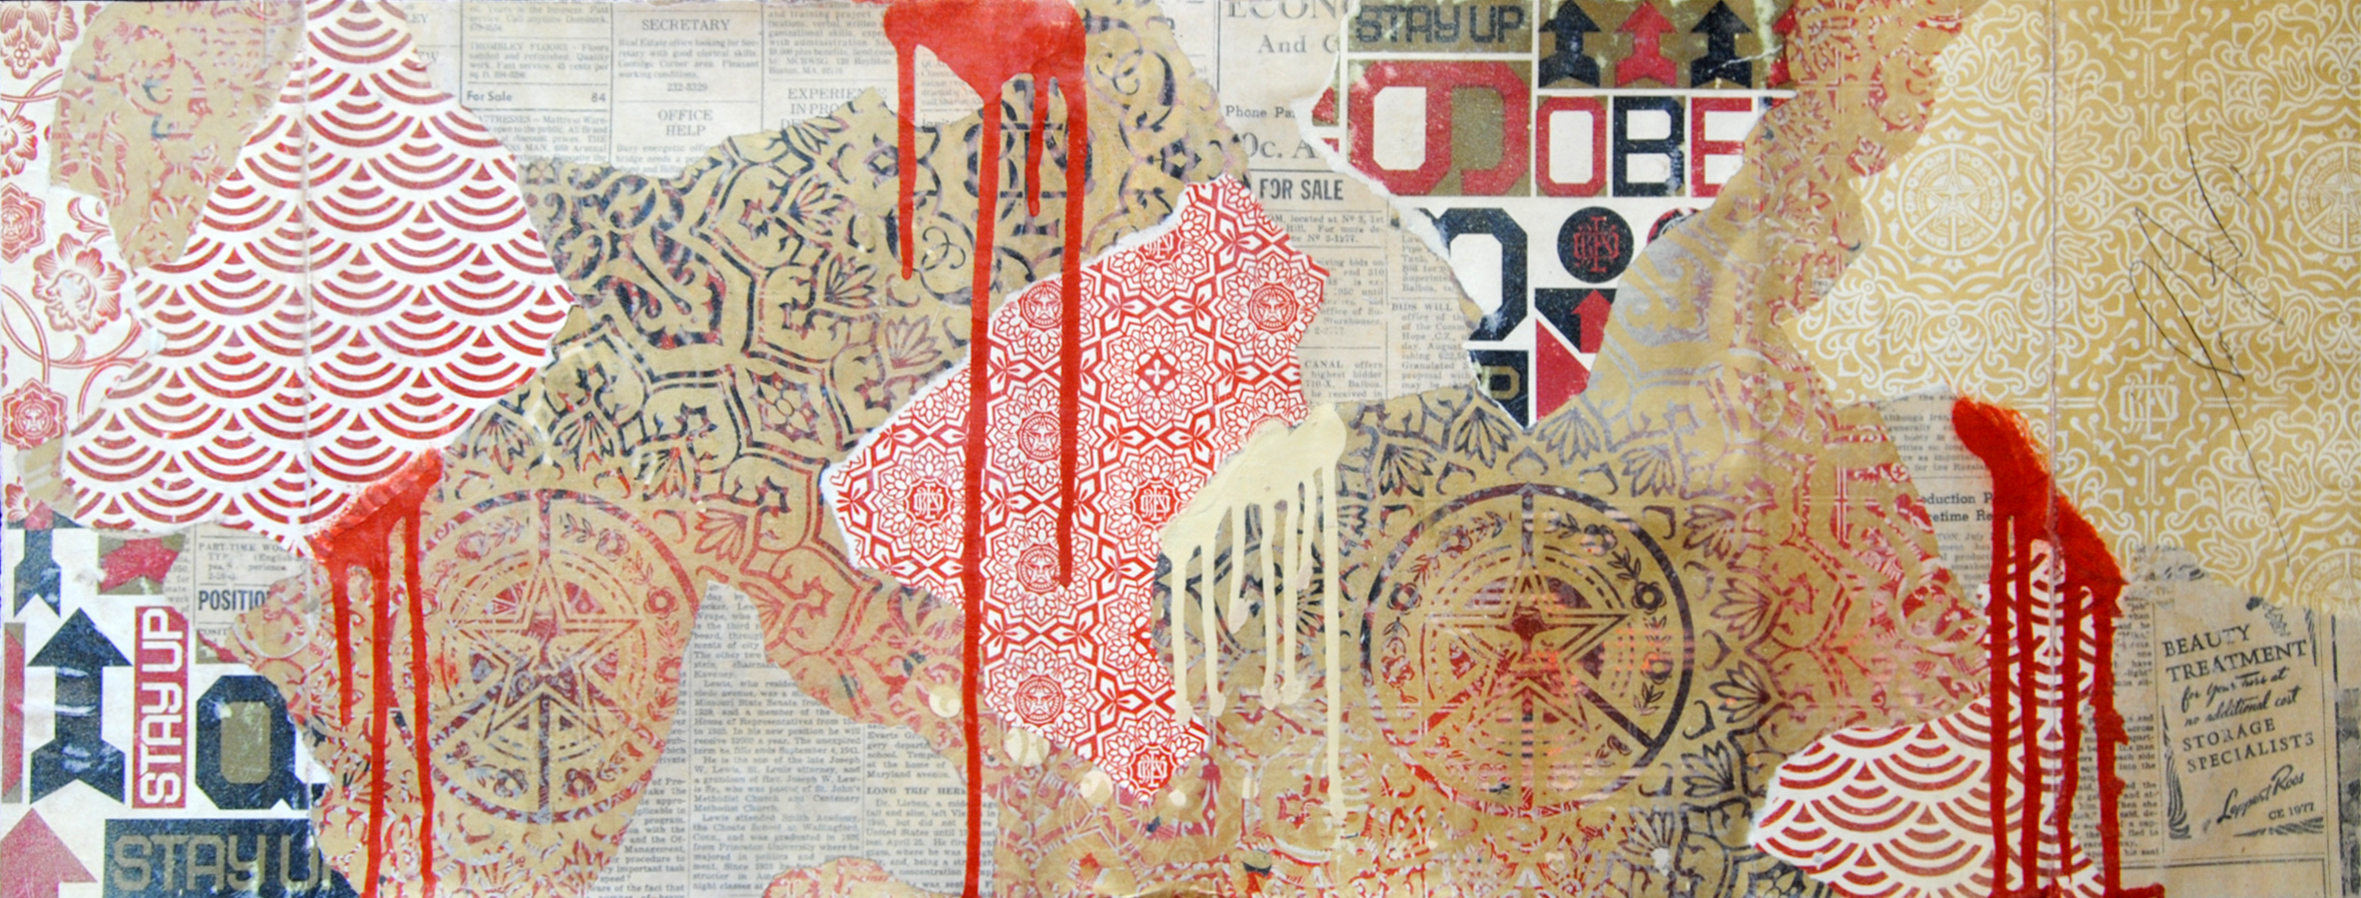 Shepard-Fairey-1-Collage-and-spray-paint-on-paper-USA